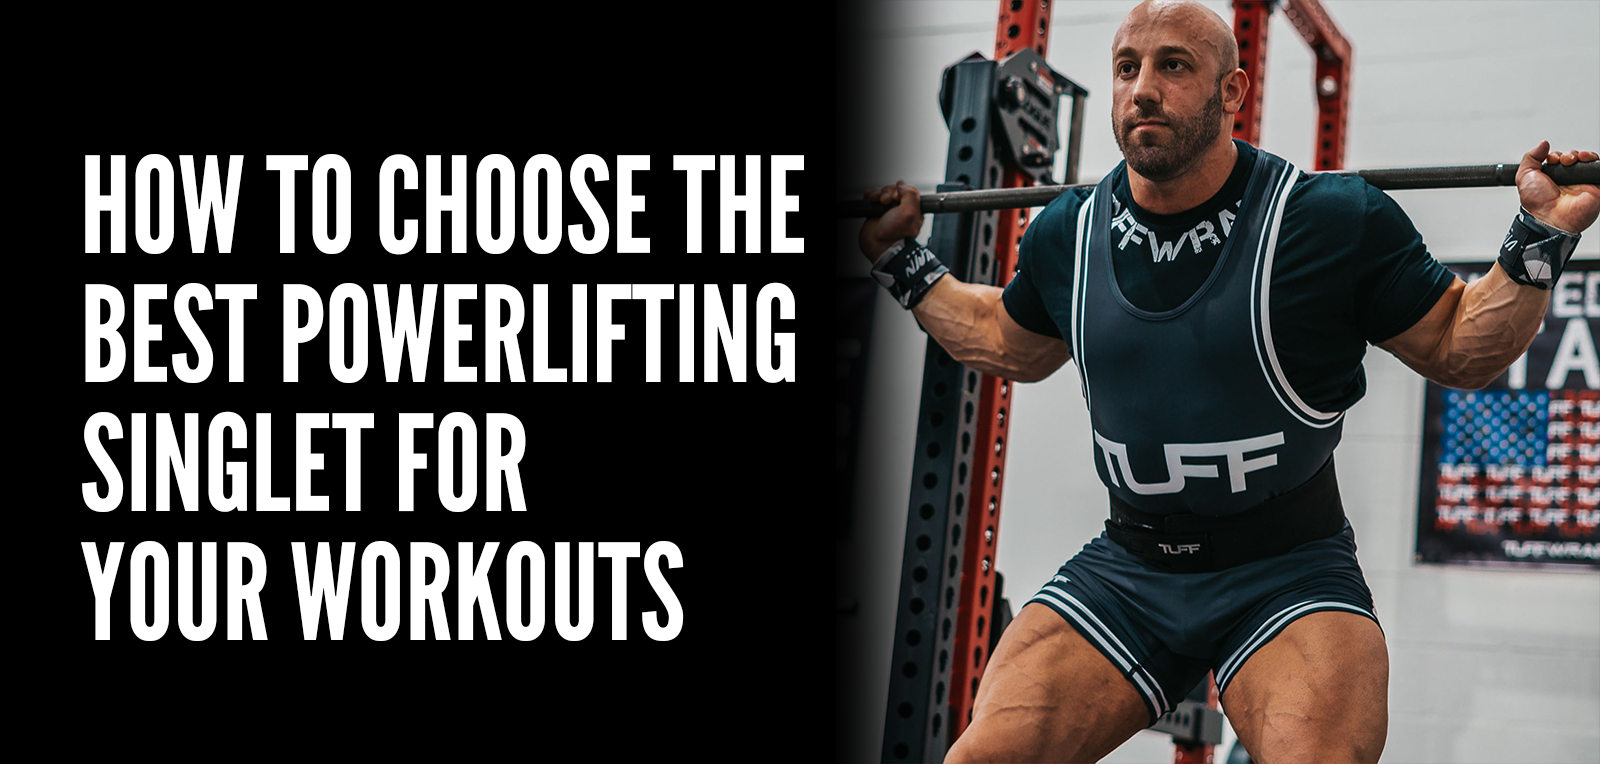 How to Choose the Best Powerlifting Singlet for Your Workouts